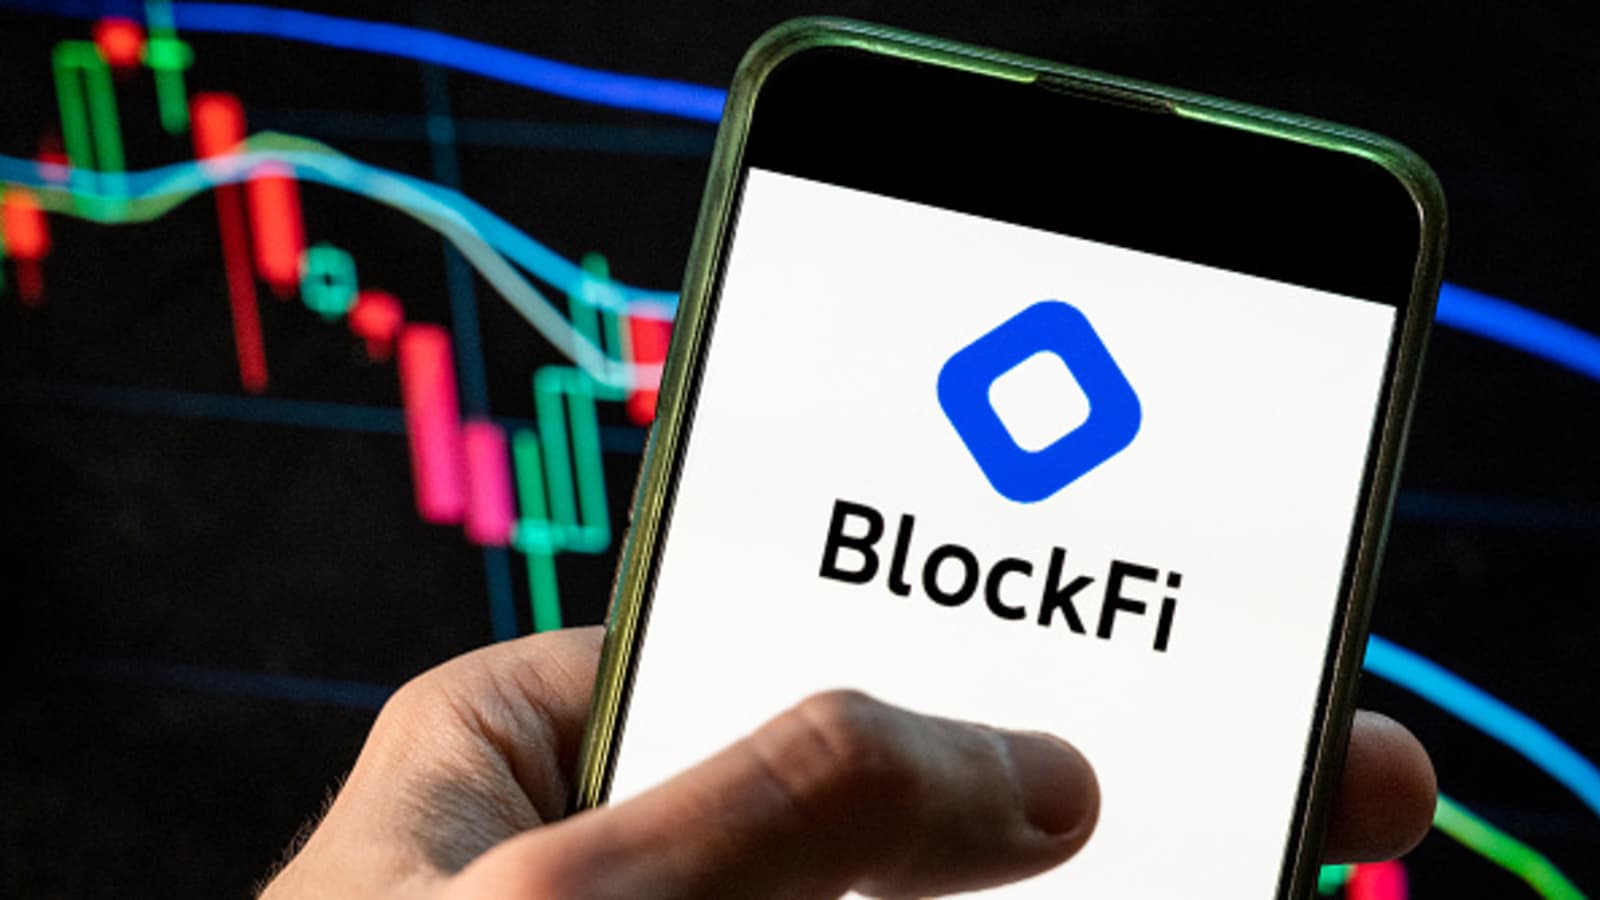 BlockFi Weighing Up its Options After FTX Collapse - What We Could Expect